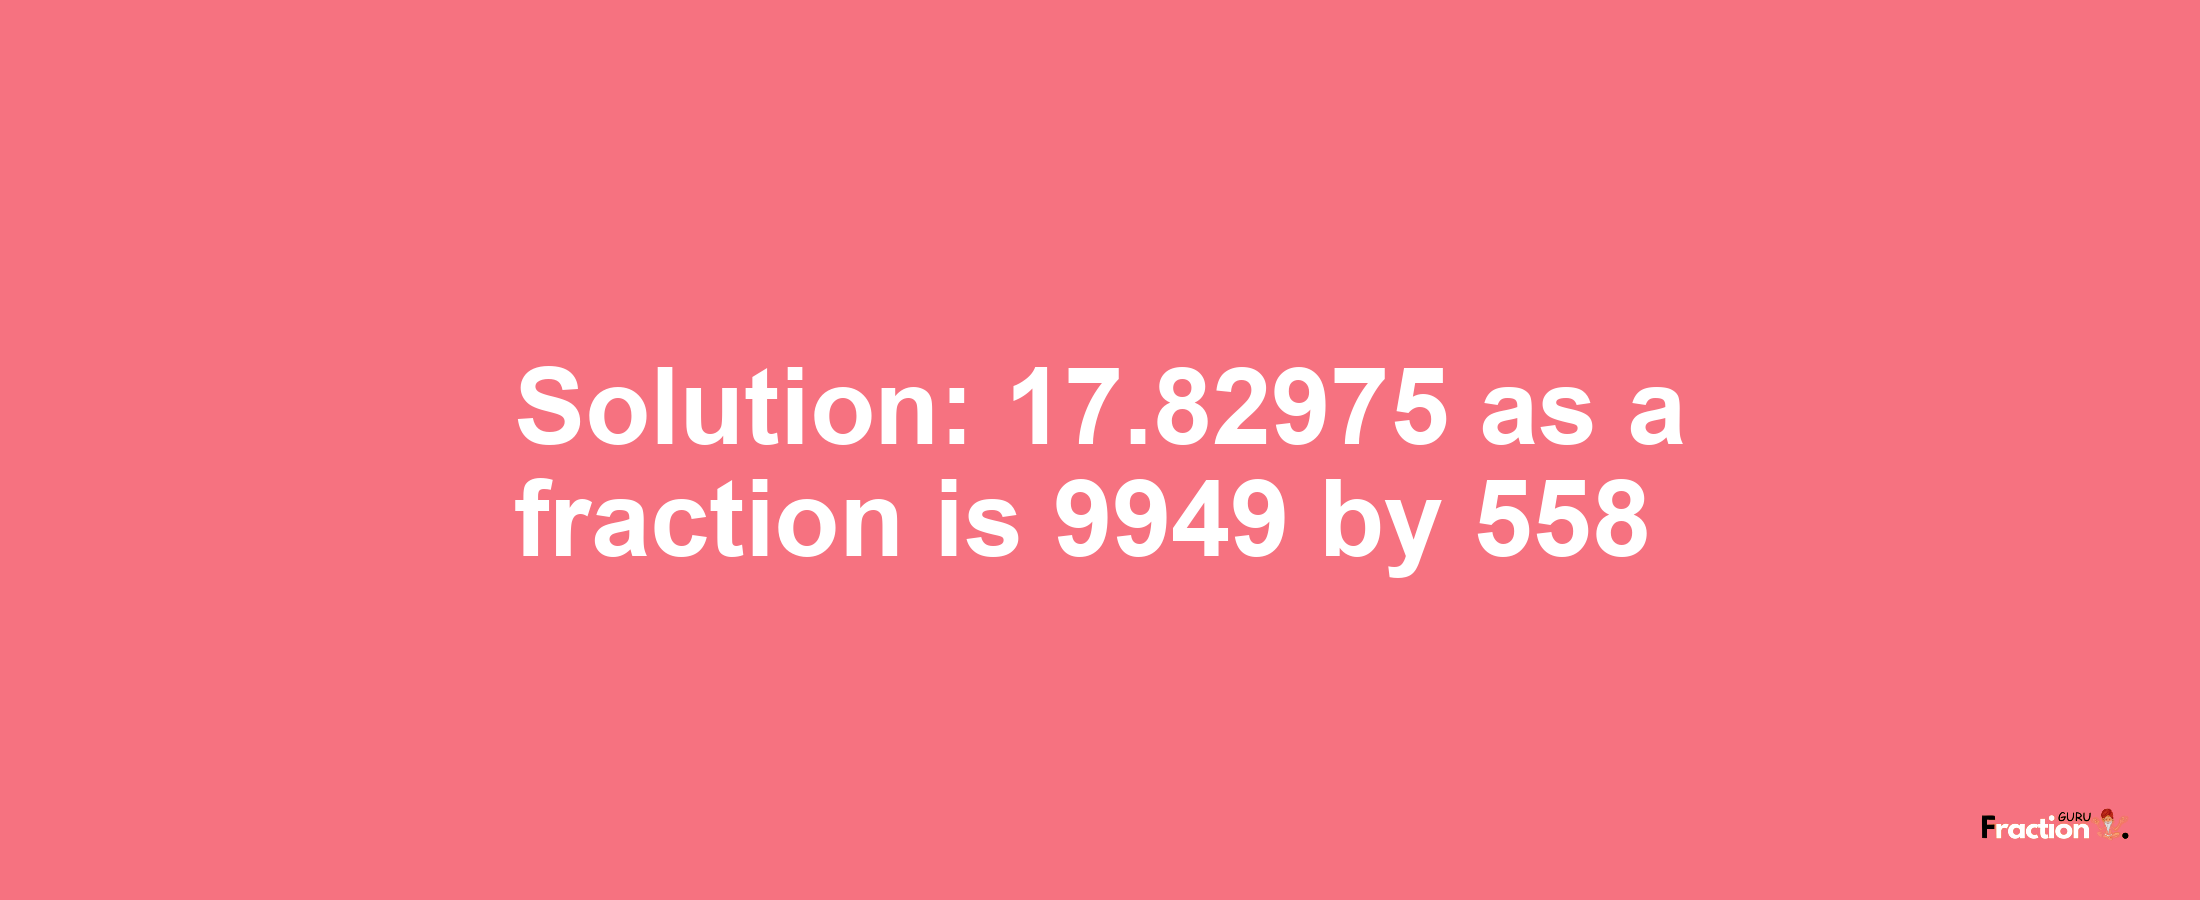 Solution:17.82975 as a fraction is 9949/558